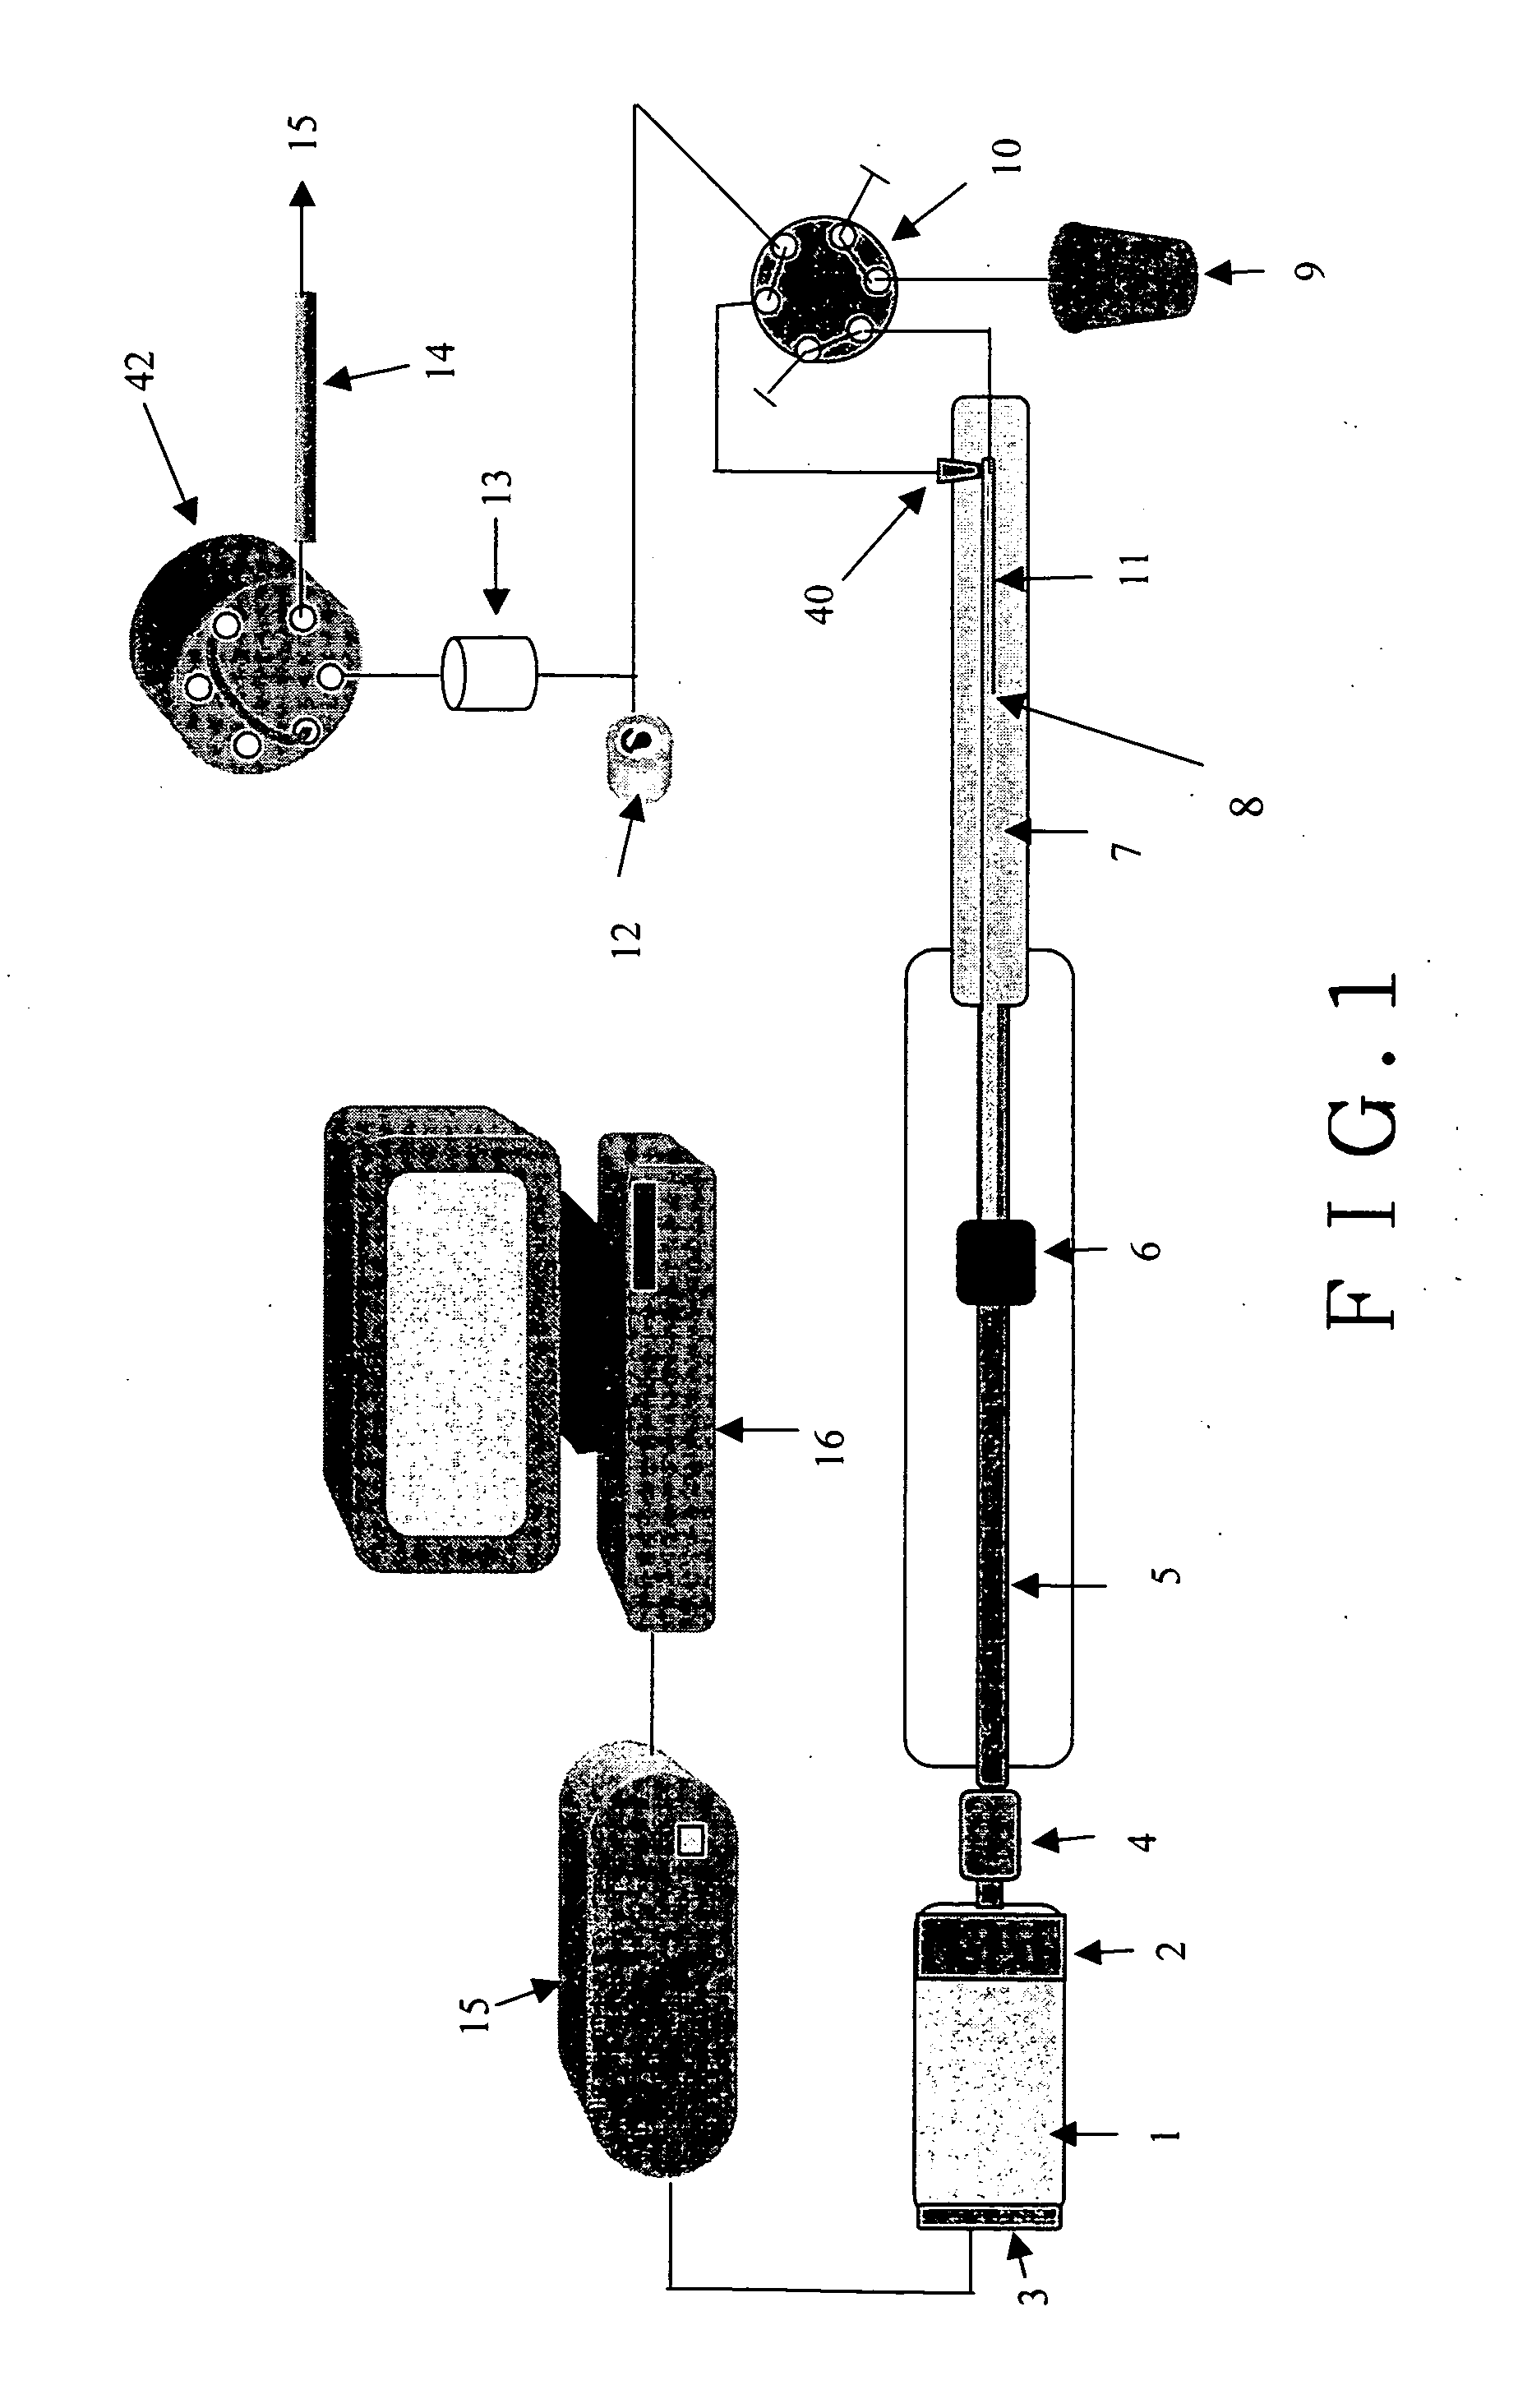 Multidimensional pump apparatus and method for fully automated complex mixtures separation, identification, and quantification